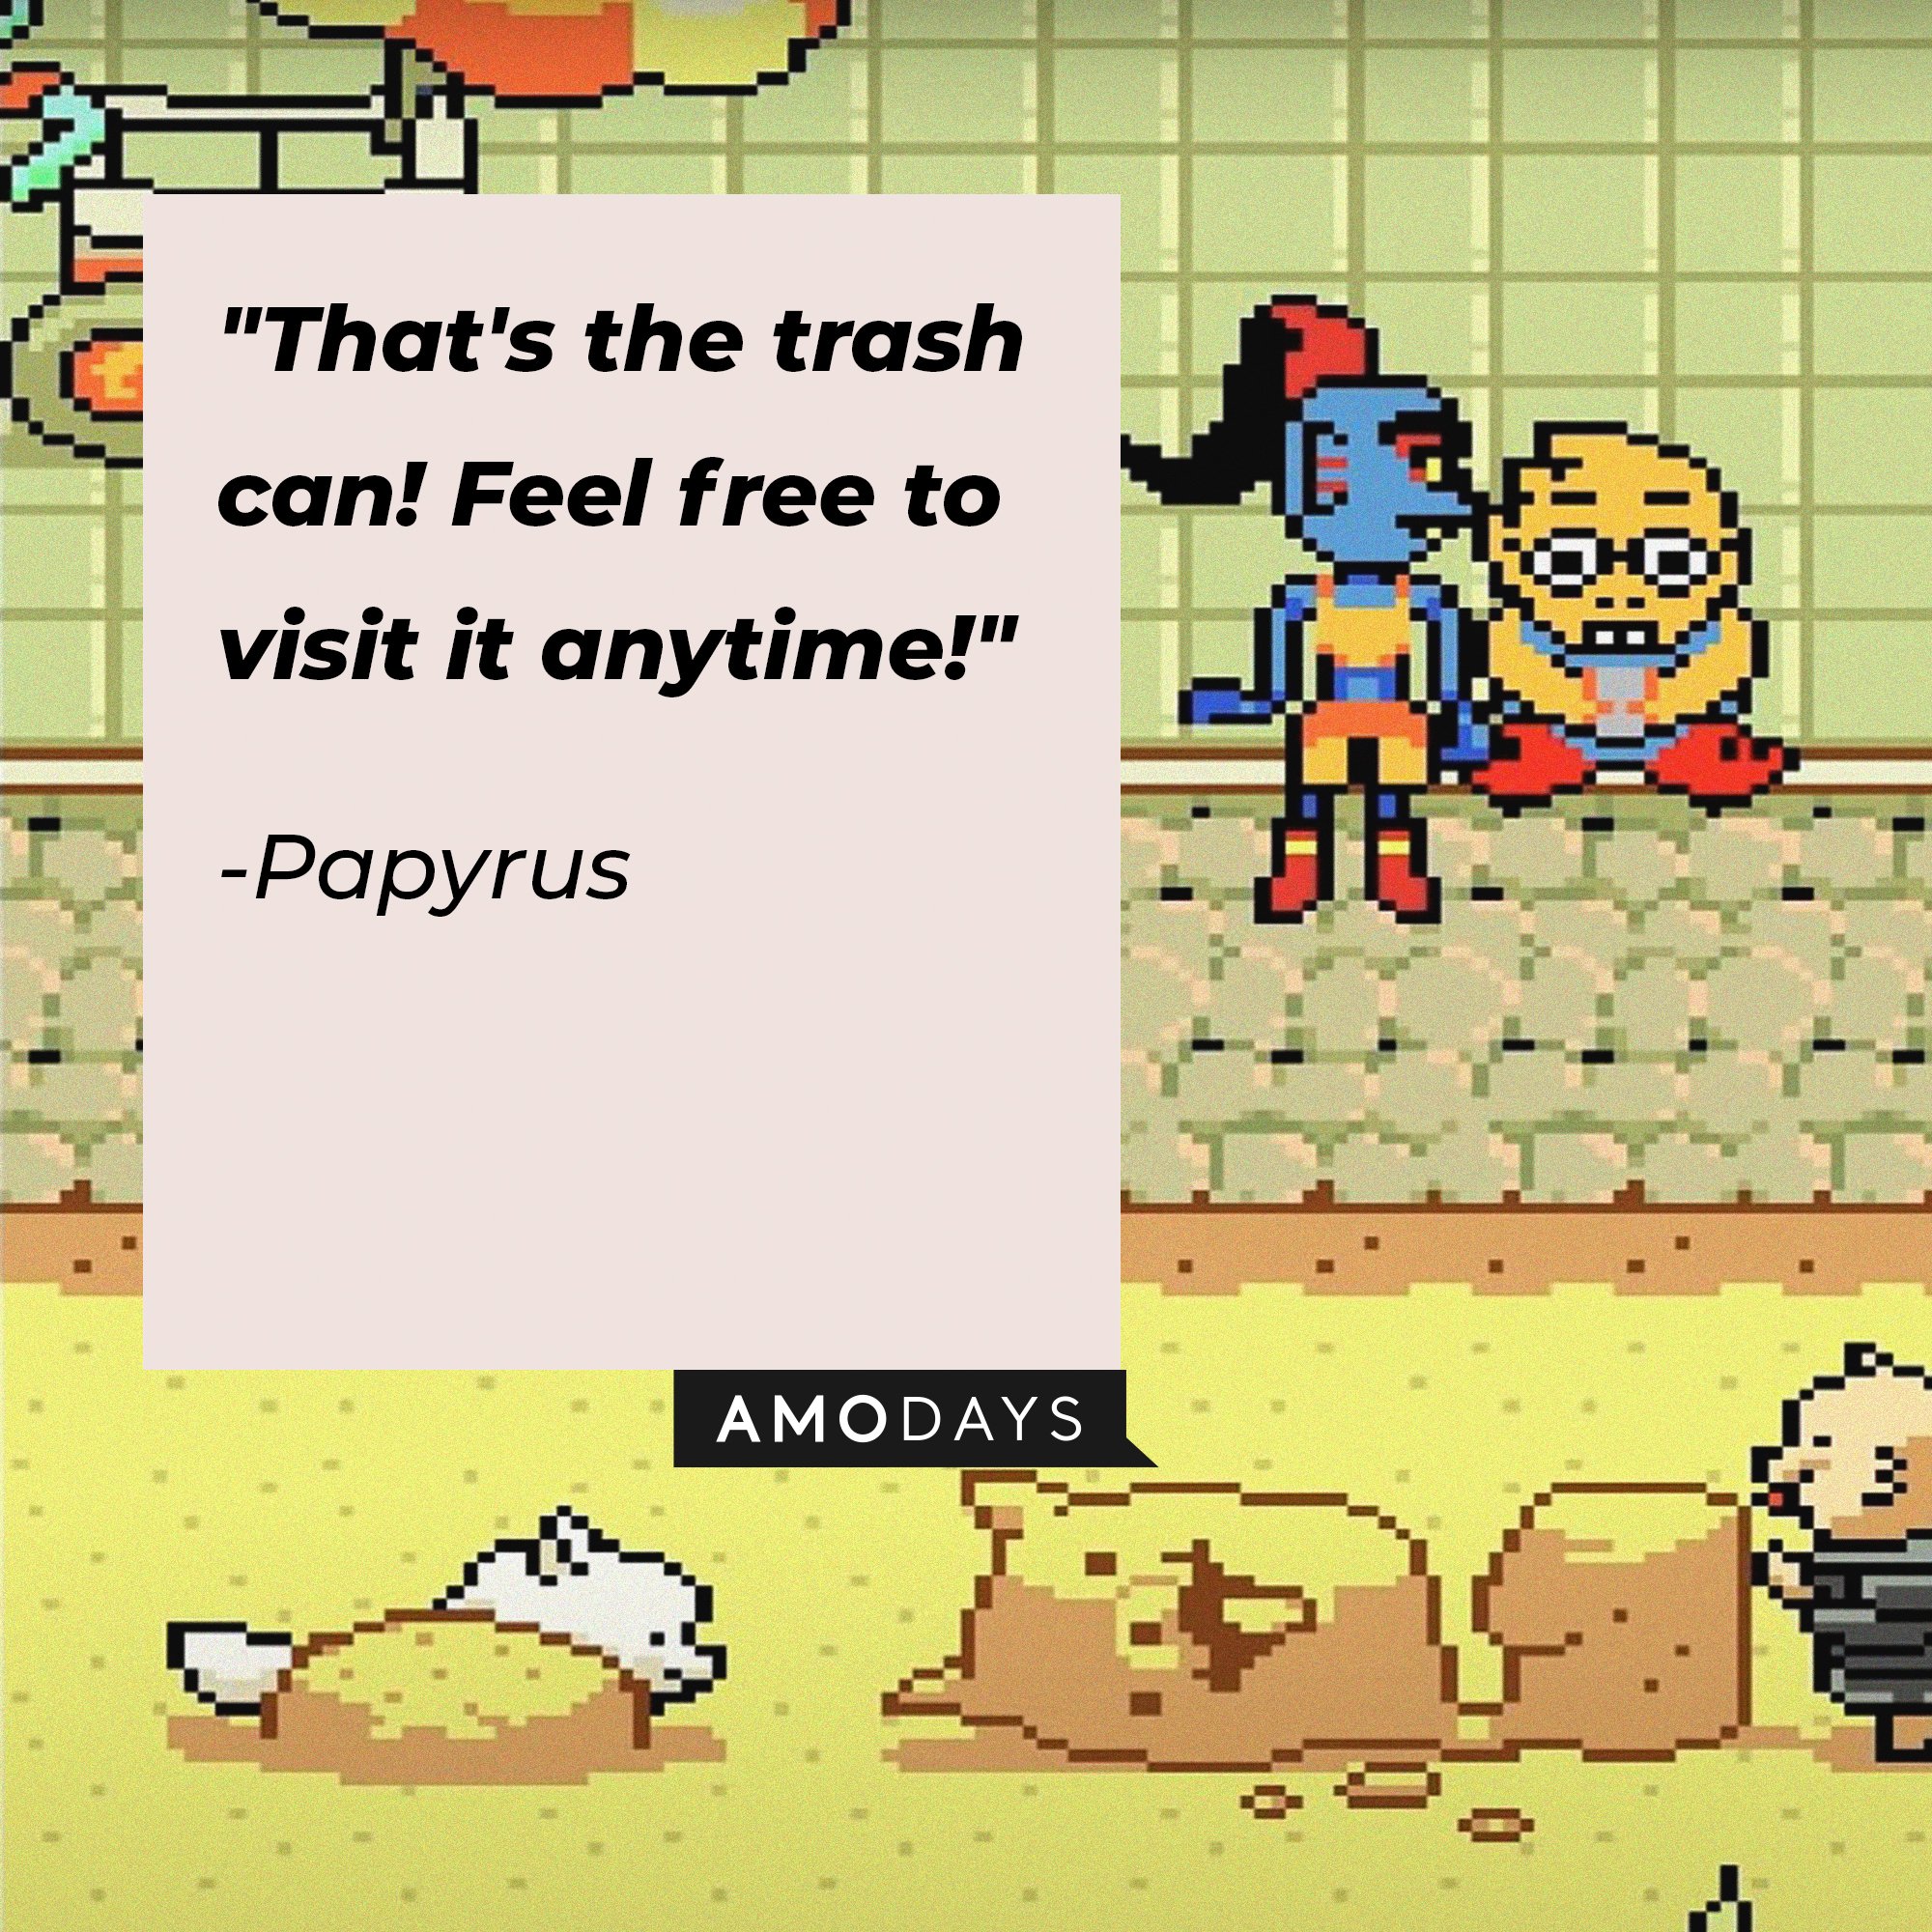 Papyrus’ quote: "That's the trash can! Feel free to visit it anytime!" | Image: AmoDays